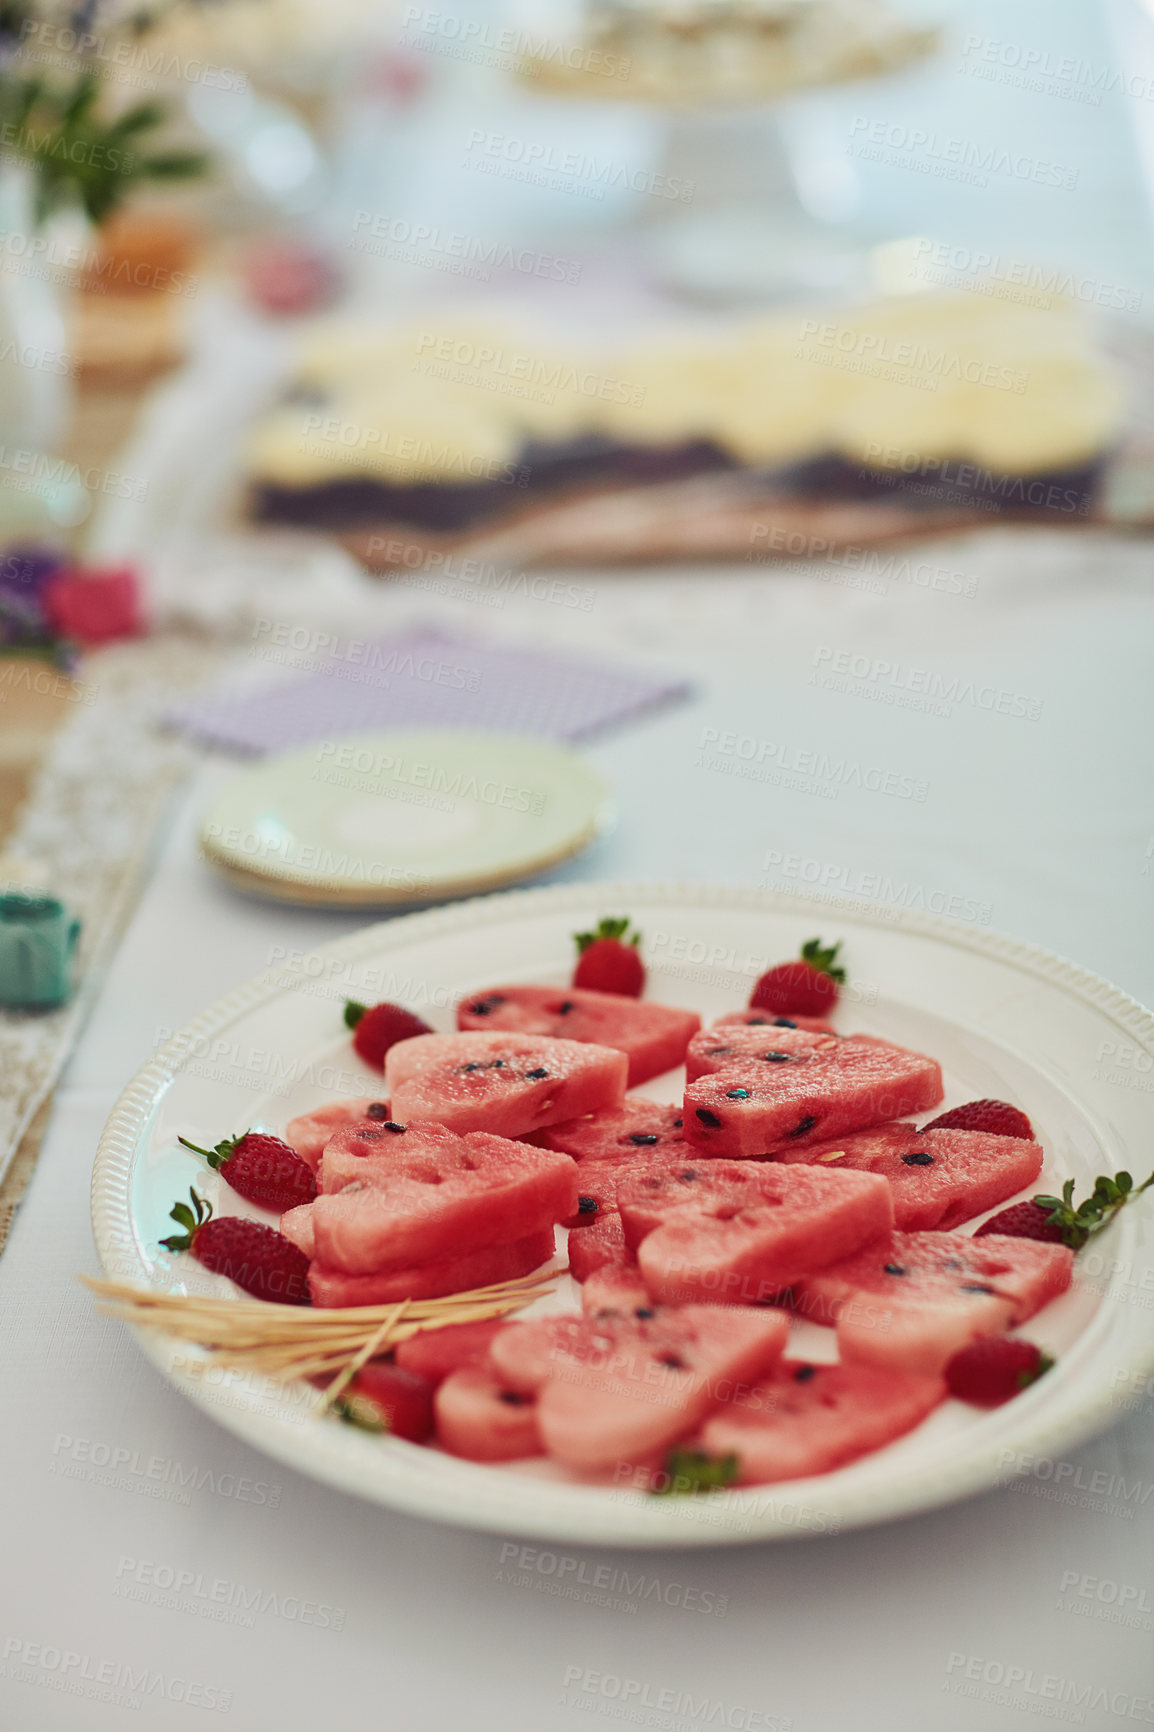 Buy stock photo Shot of watermelon cut into heart shapes on a table at a tea party inside